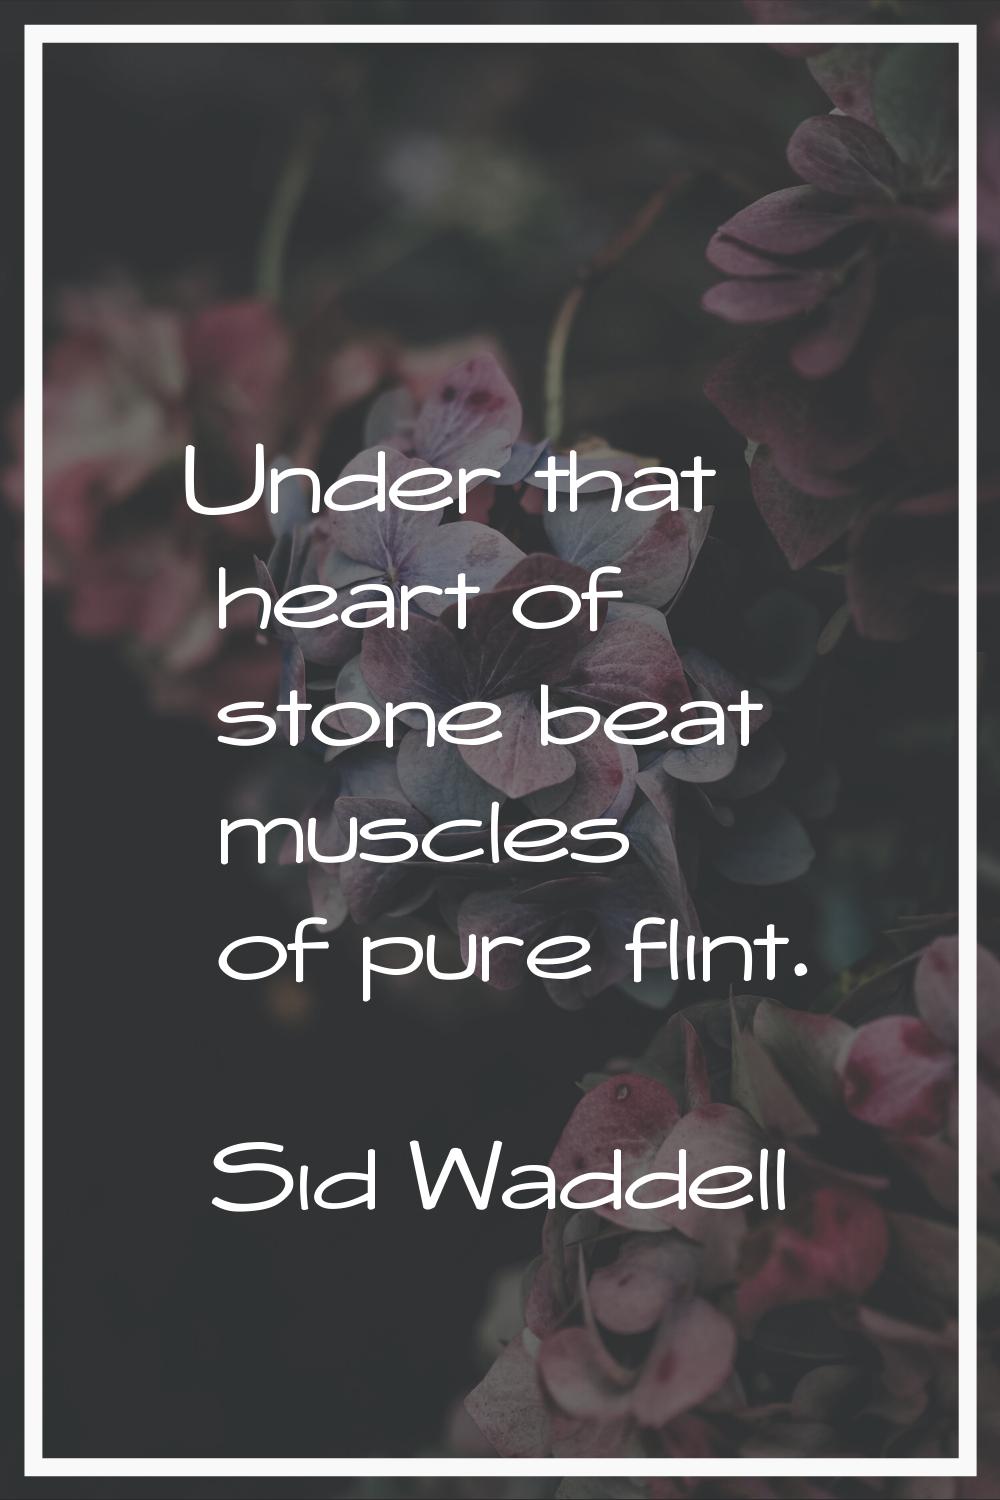 Under that heart of stone beat muscles of pure flint.